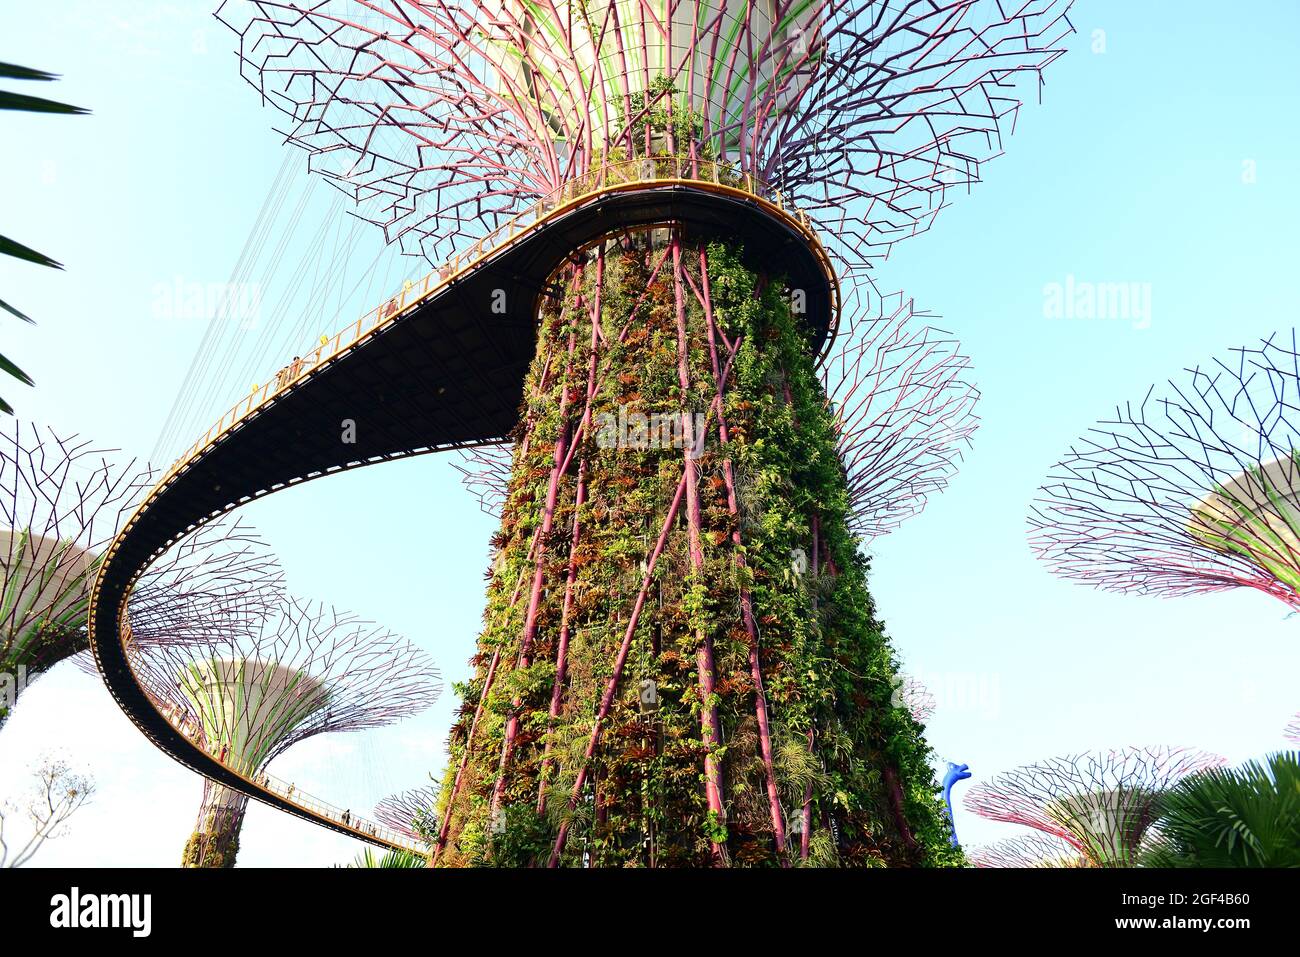 Singapore, Gardens by the Bay. Stock Photo